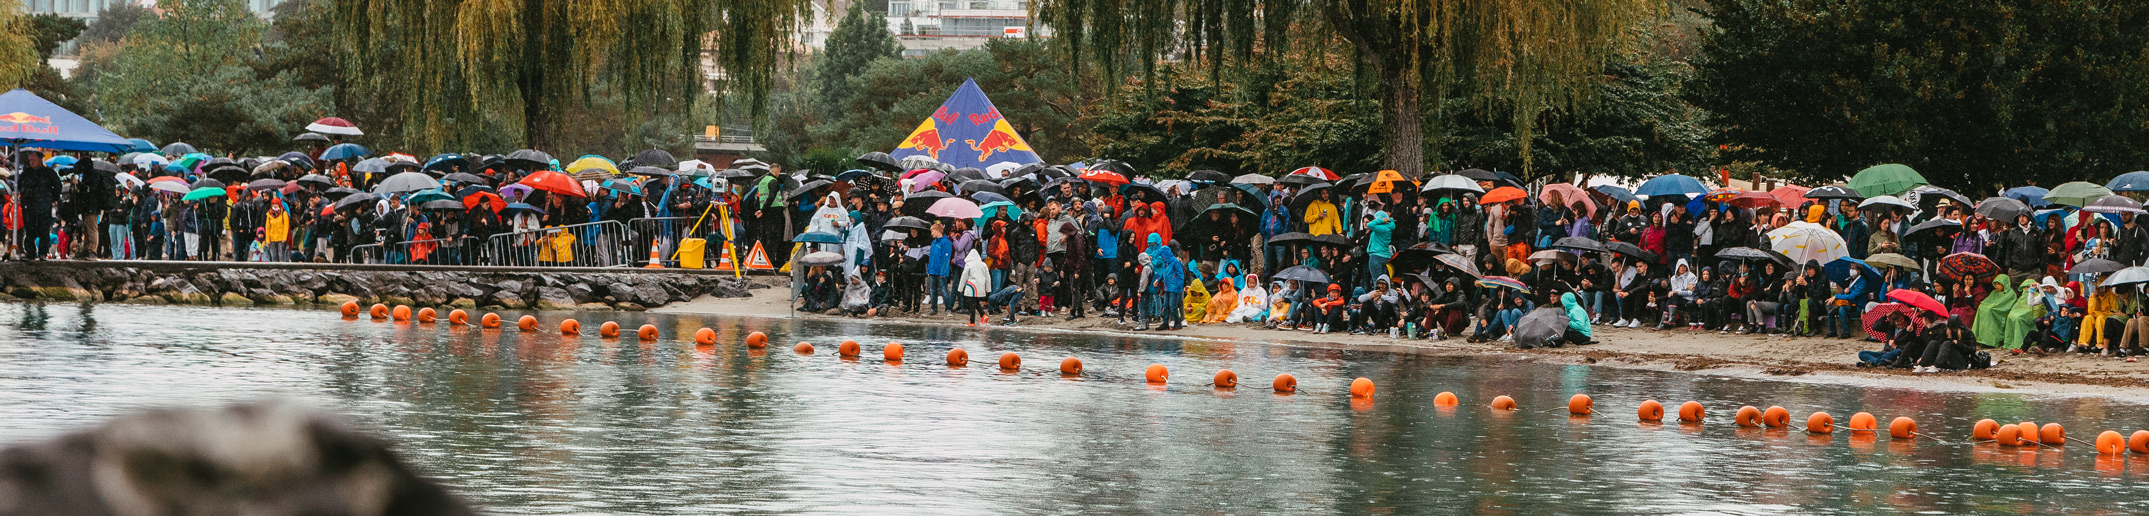 A crowd of people stands near a body of water.